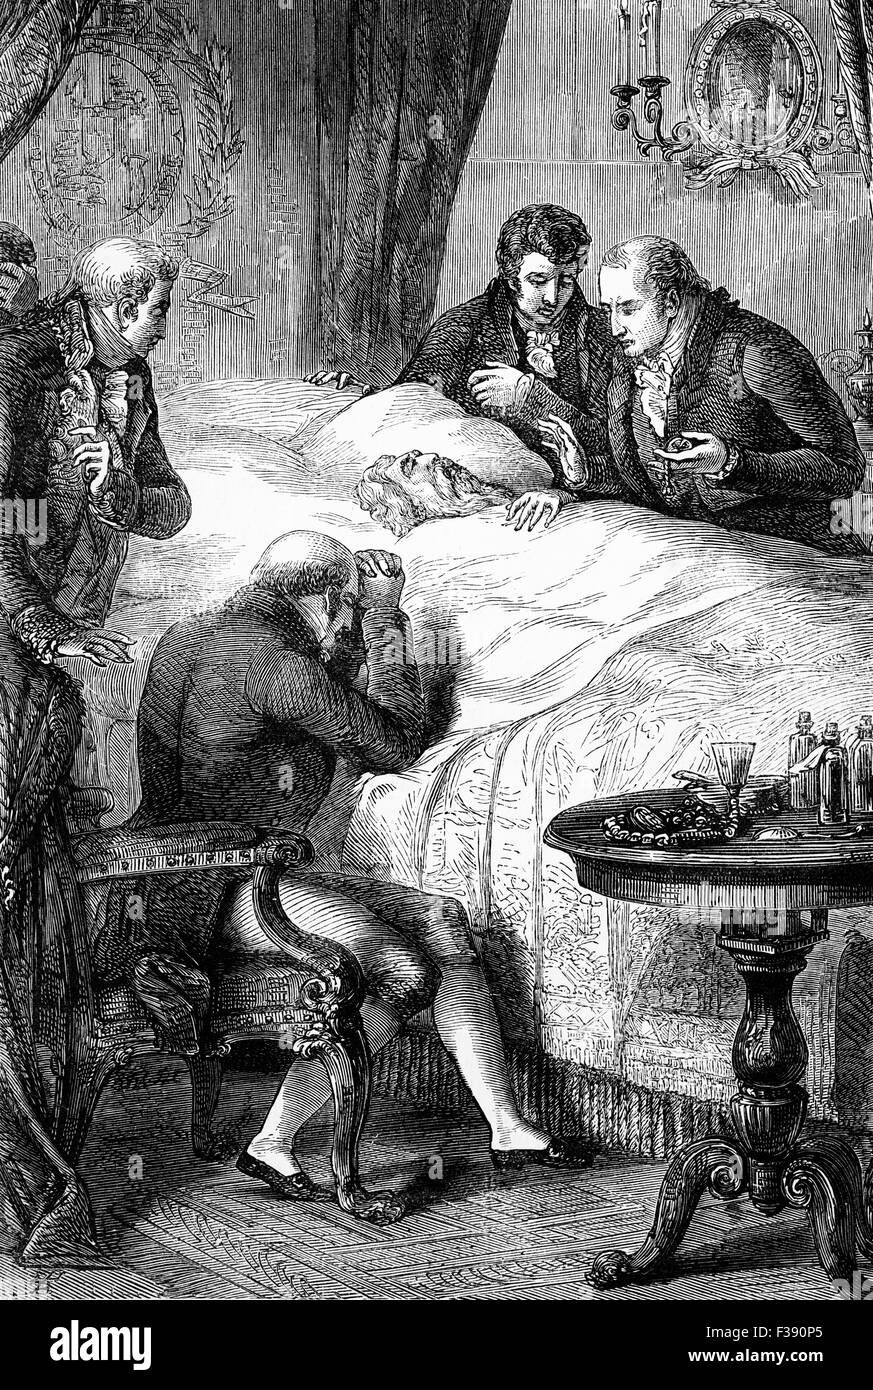 The death of King George III at Windsor Castle on 29 January 1820; he was later buried on 16 February in St. George's Chapel, Windsor Castle, England. Stock Photo